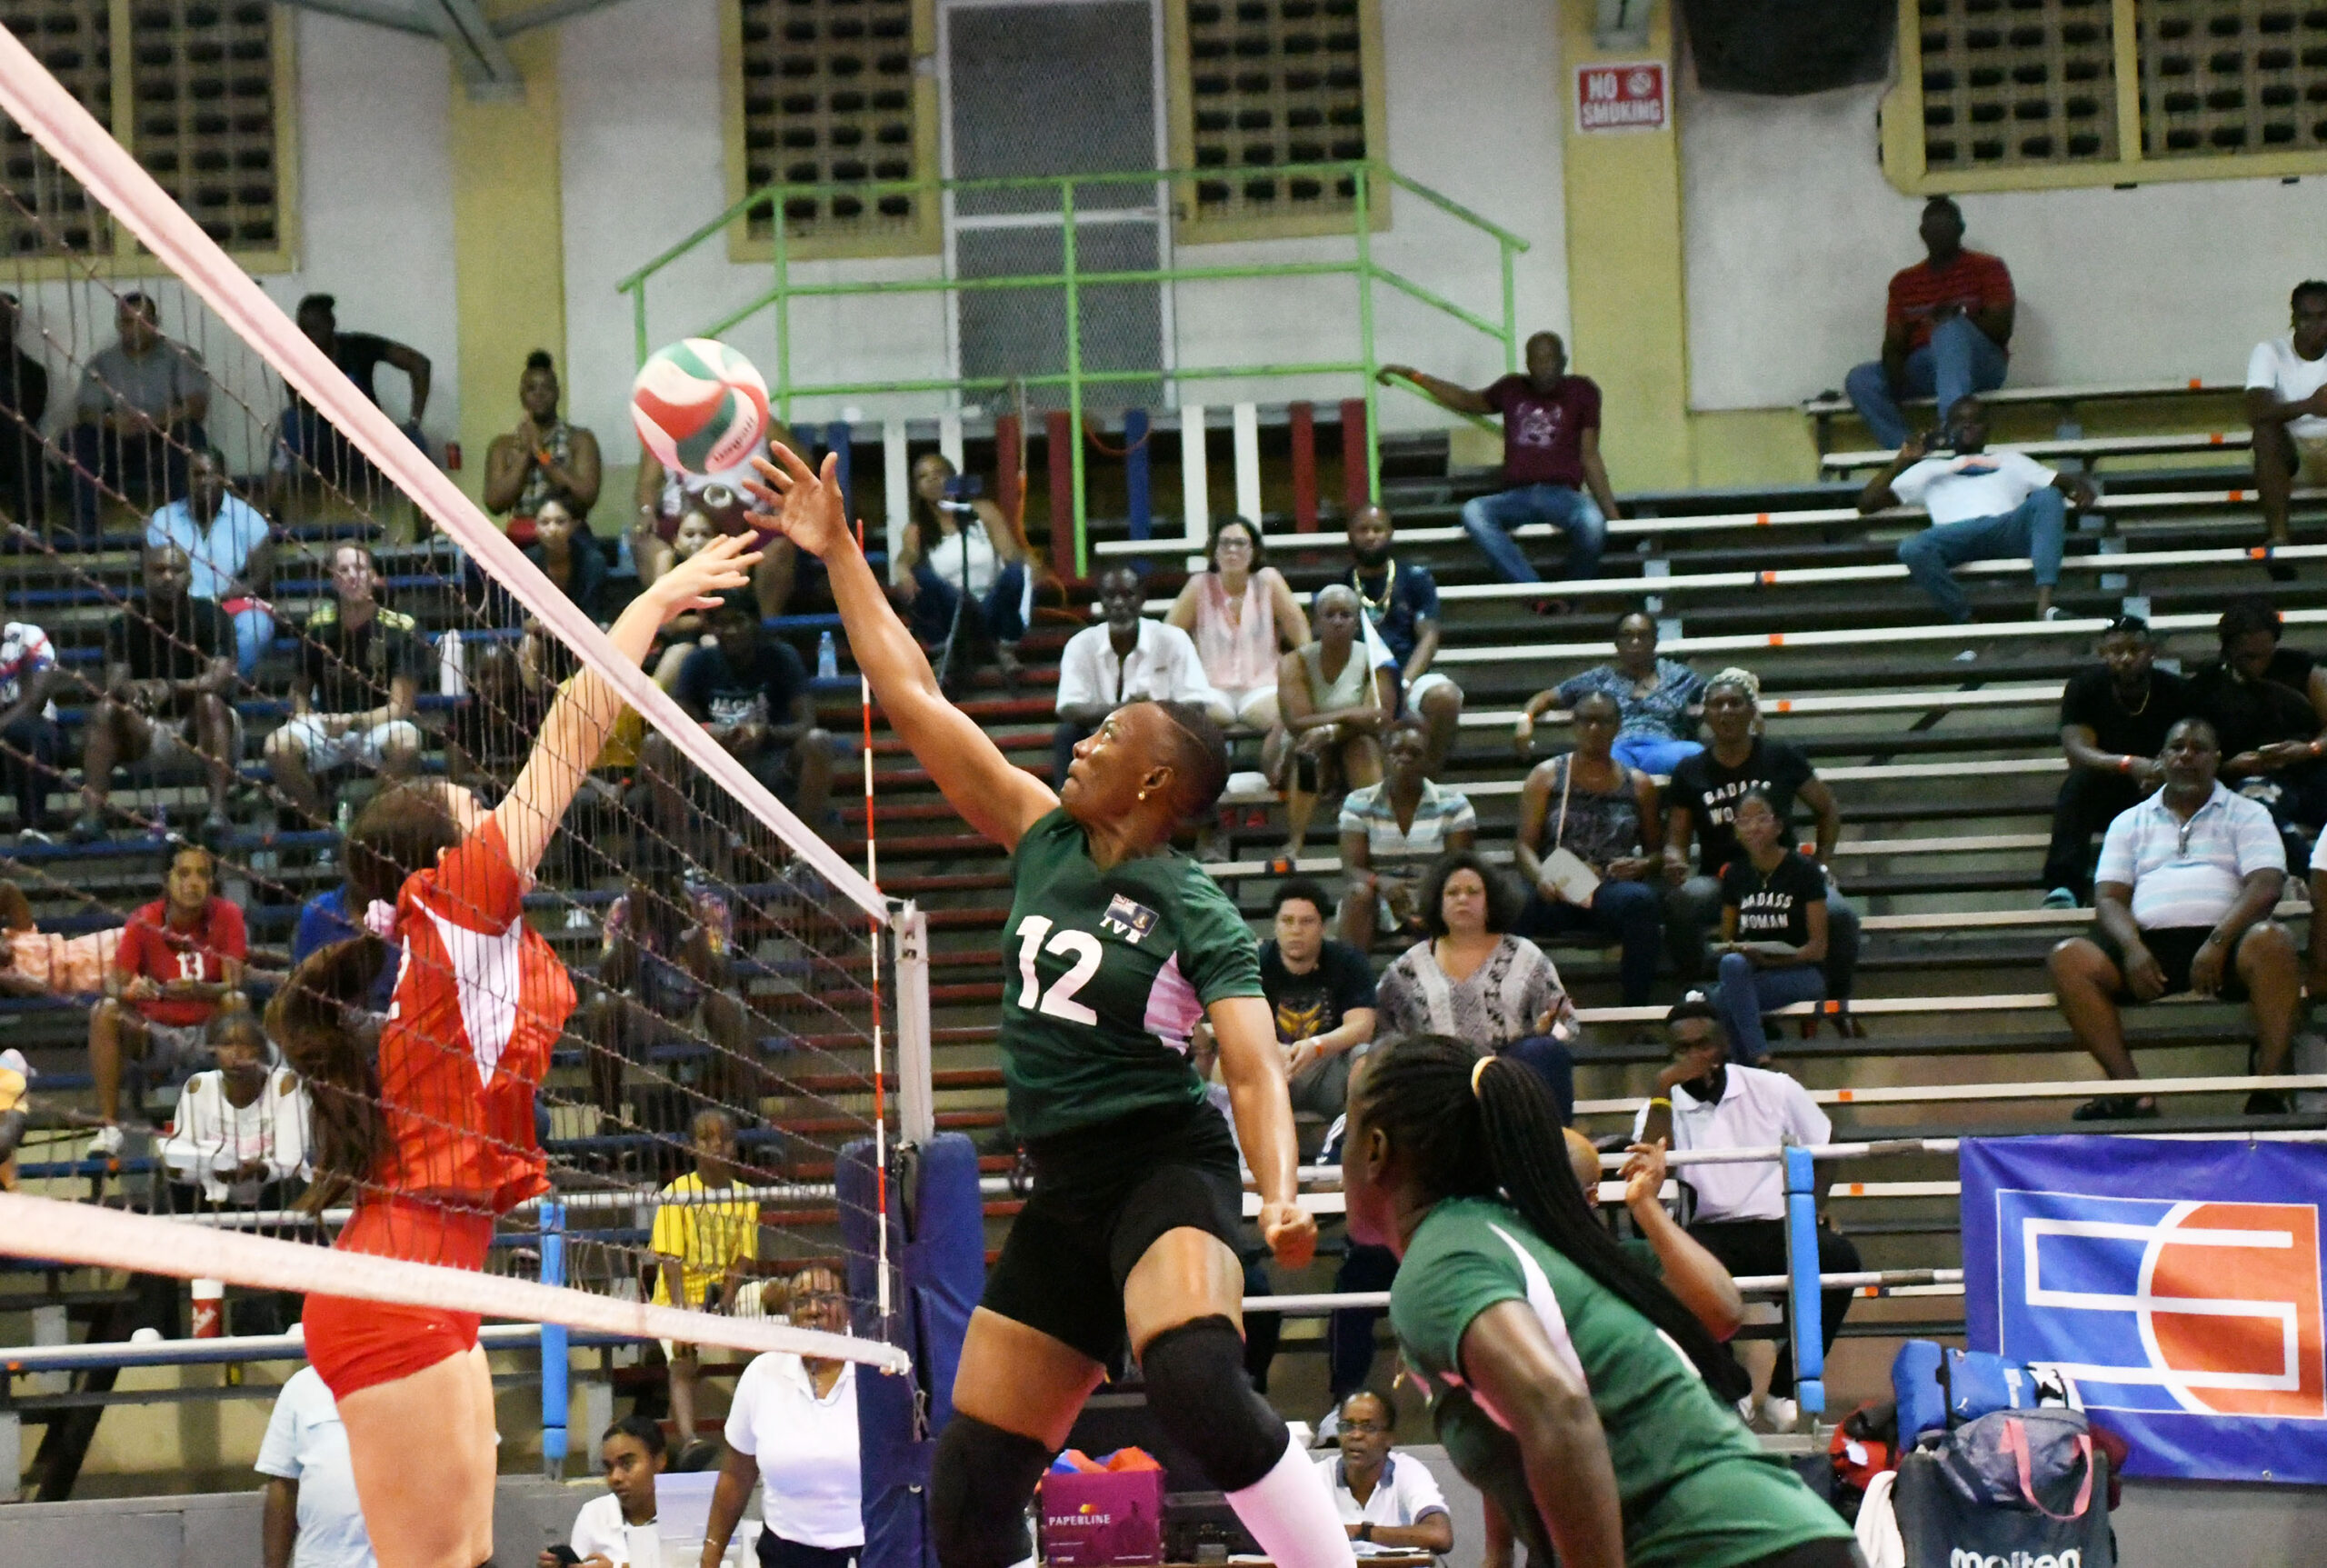 BVI silences home crowd defeating St. Maarten on route to finals